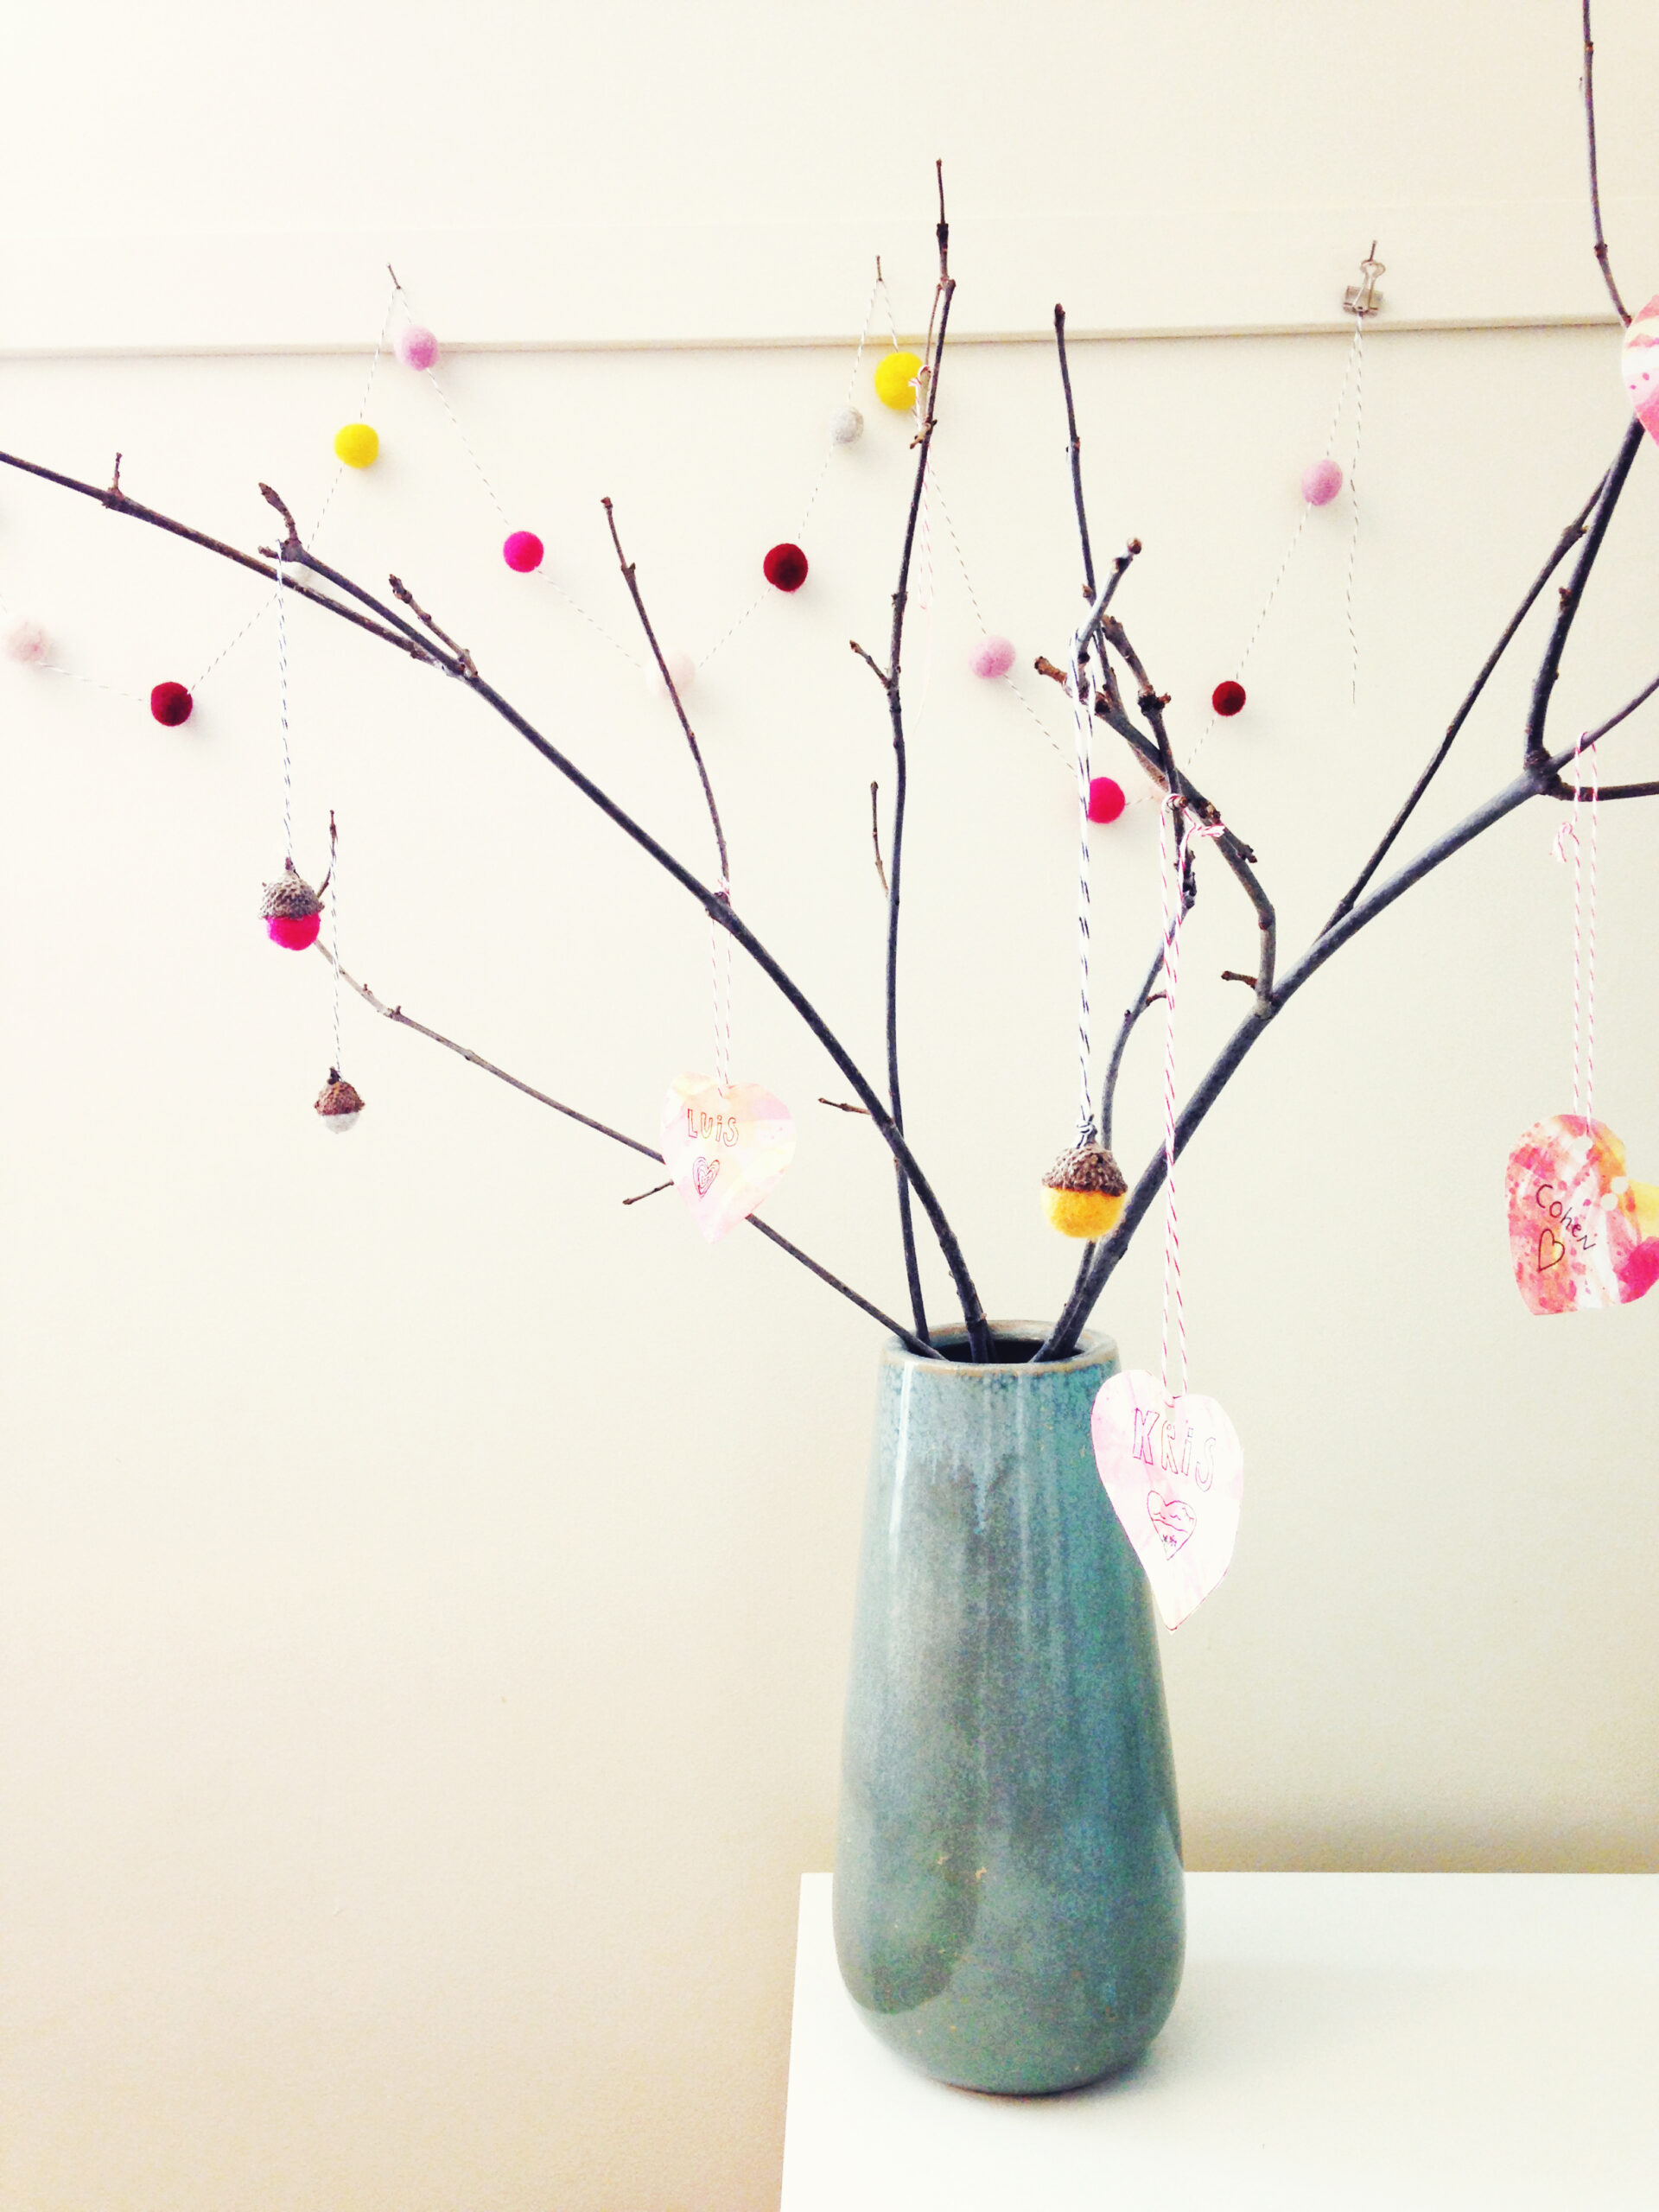 Valentine Heart Strings Tree - an simple, thoughtful activity to do with your kiddos for Valentine's Day!